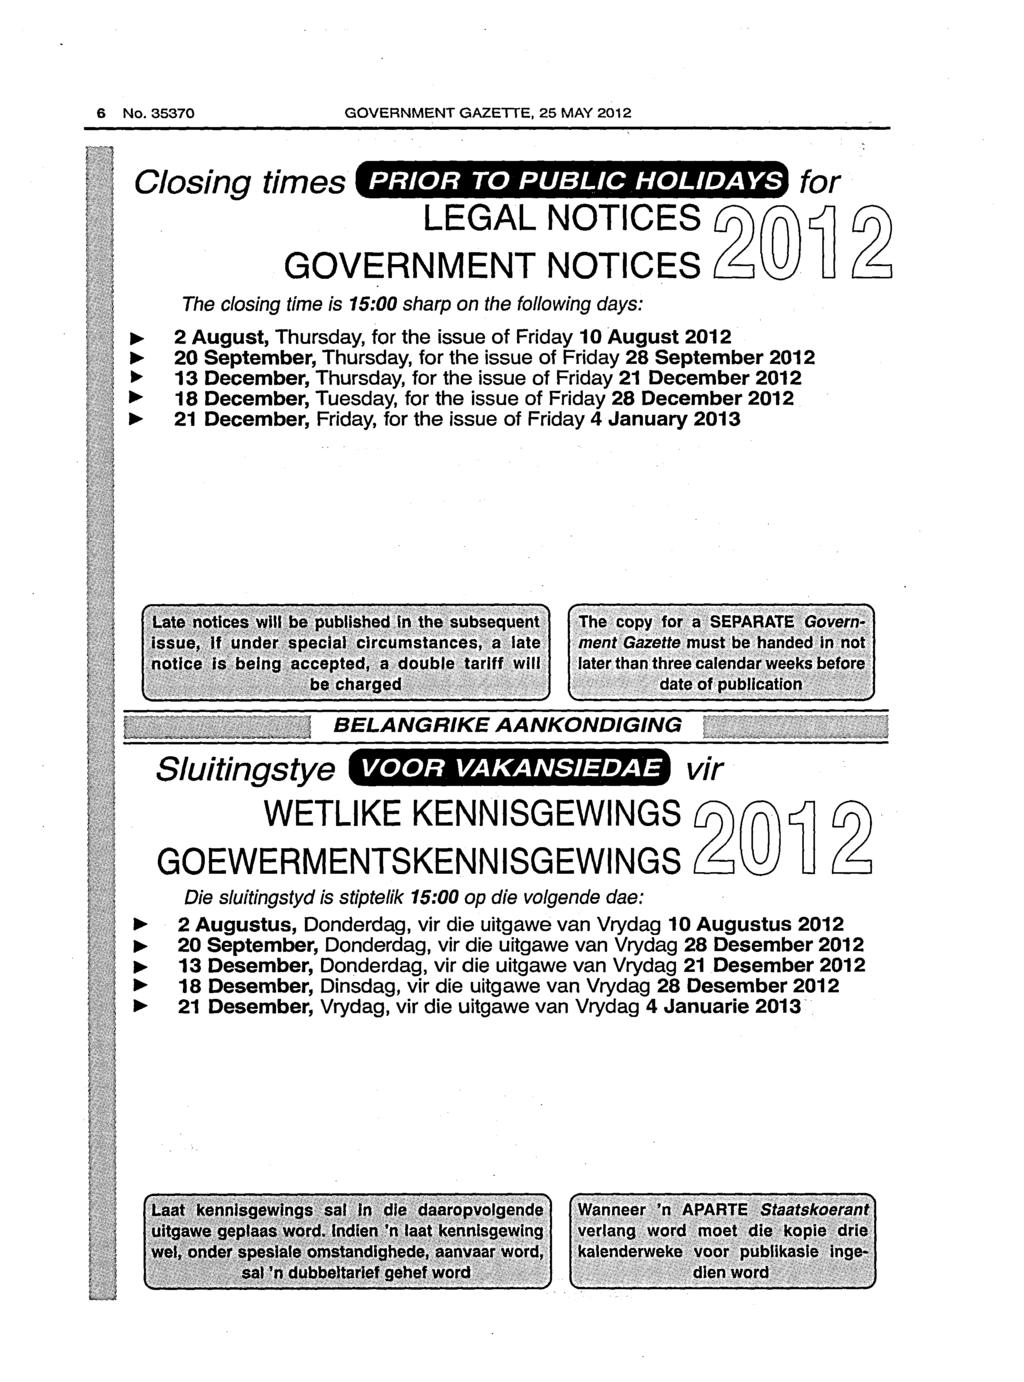 6 No. 35370 GOVERNMENT GAZETTE, 25 MAY 2012 Closing times PRIOR TO PUBLIC HOLIDAYS LEGAL NOTICES GOVERNMENT NOTICES The closing time is 15:00 sharp on the following days: 2 August, Thursday, for the